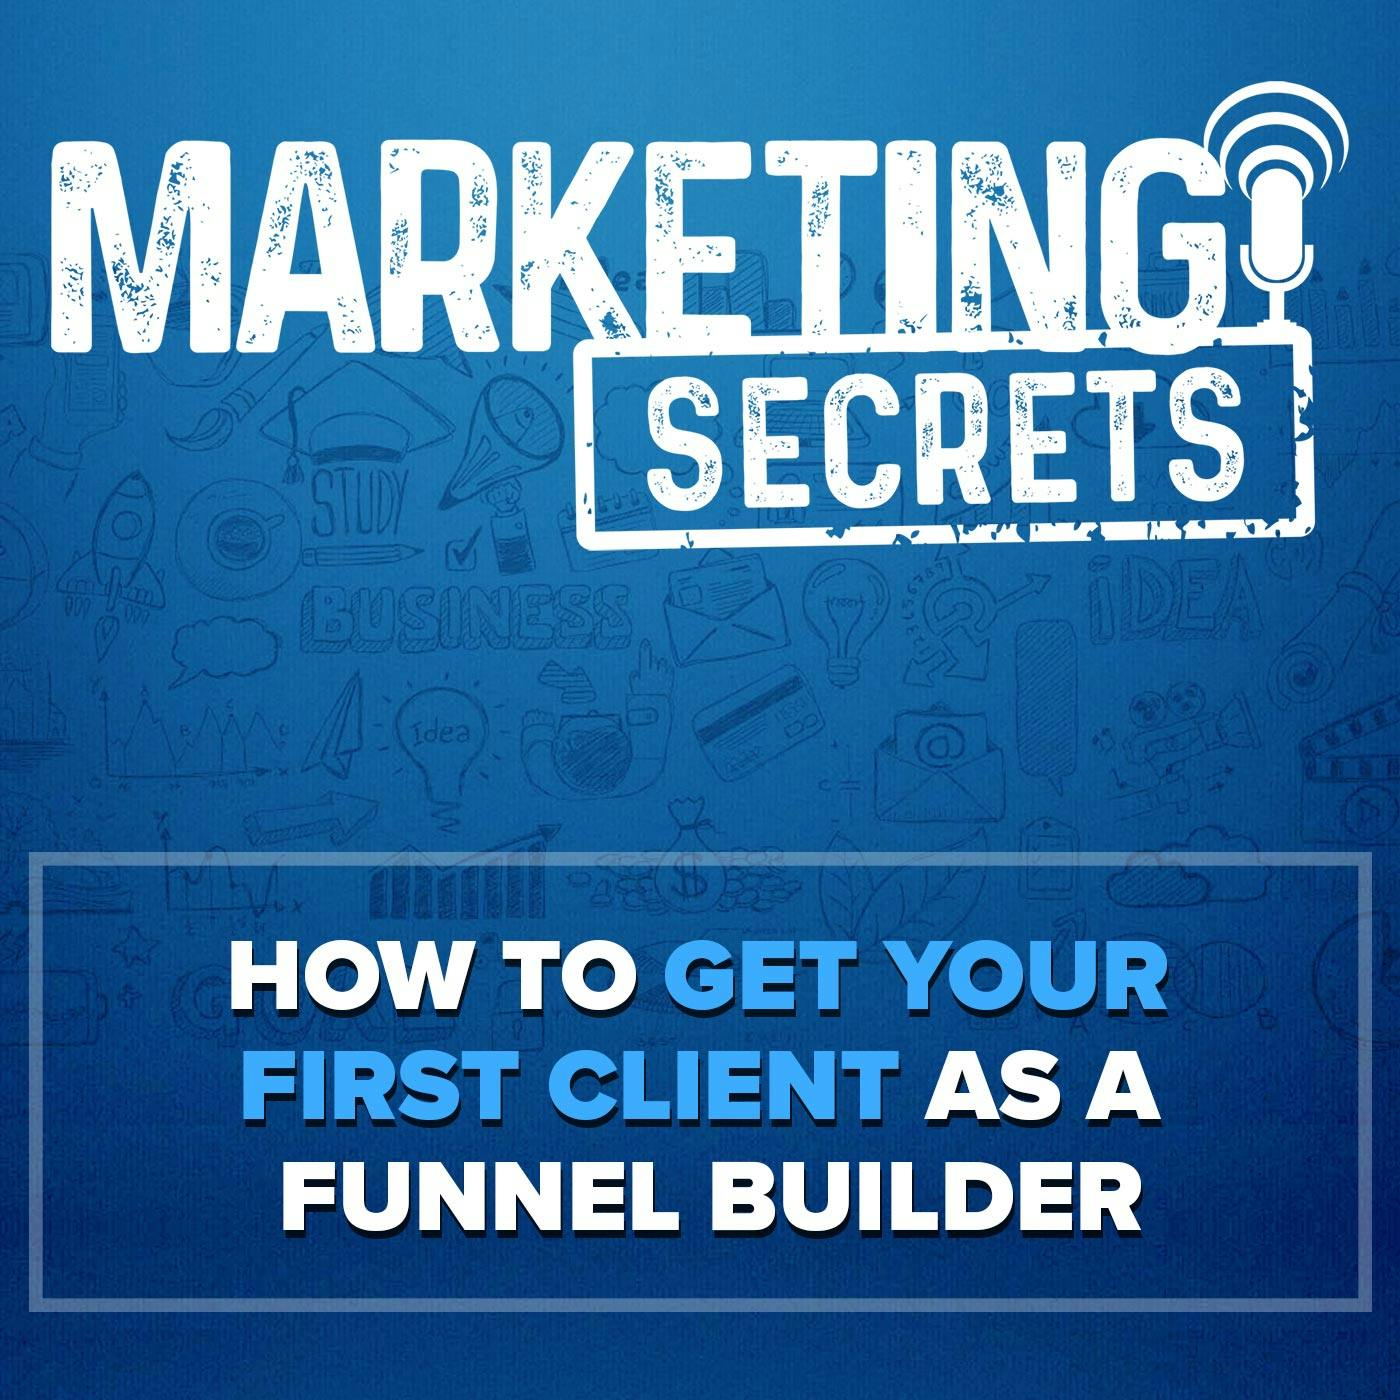 How To Get Your First Client As A Funnel Builder